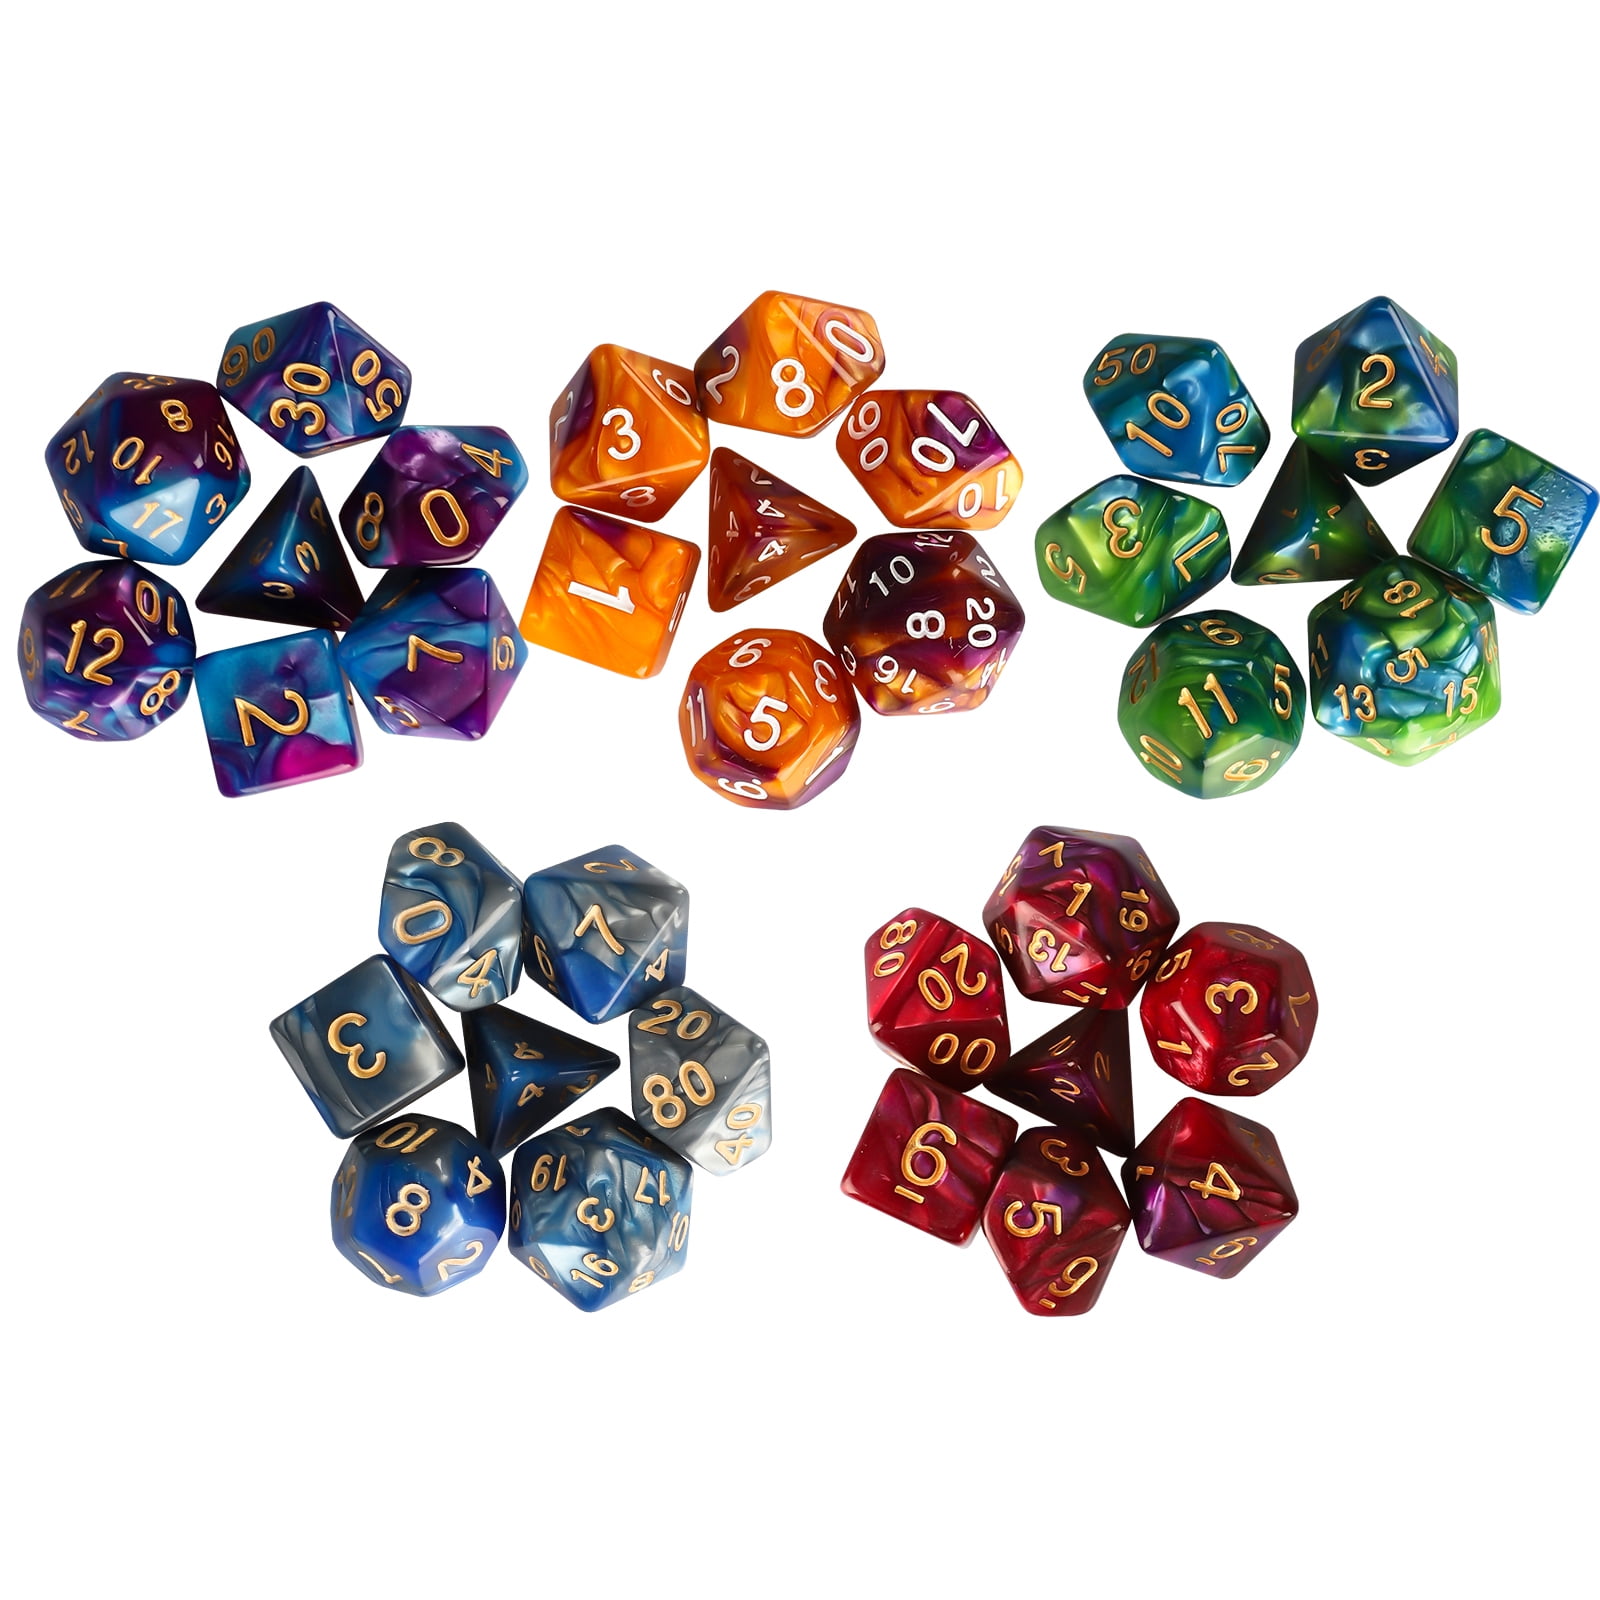 7pc Polyhedral Acrylic Dungeons Dragons Dice Multiple Sides Role PlayingGame-qk 